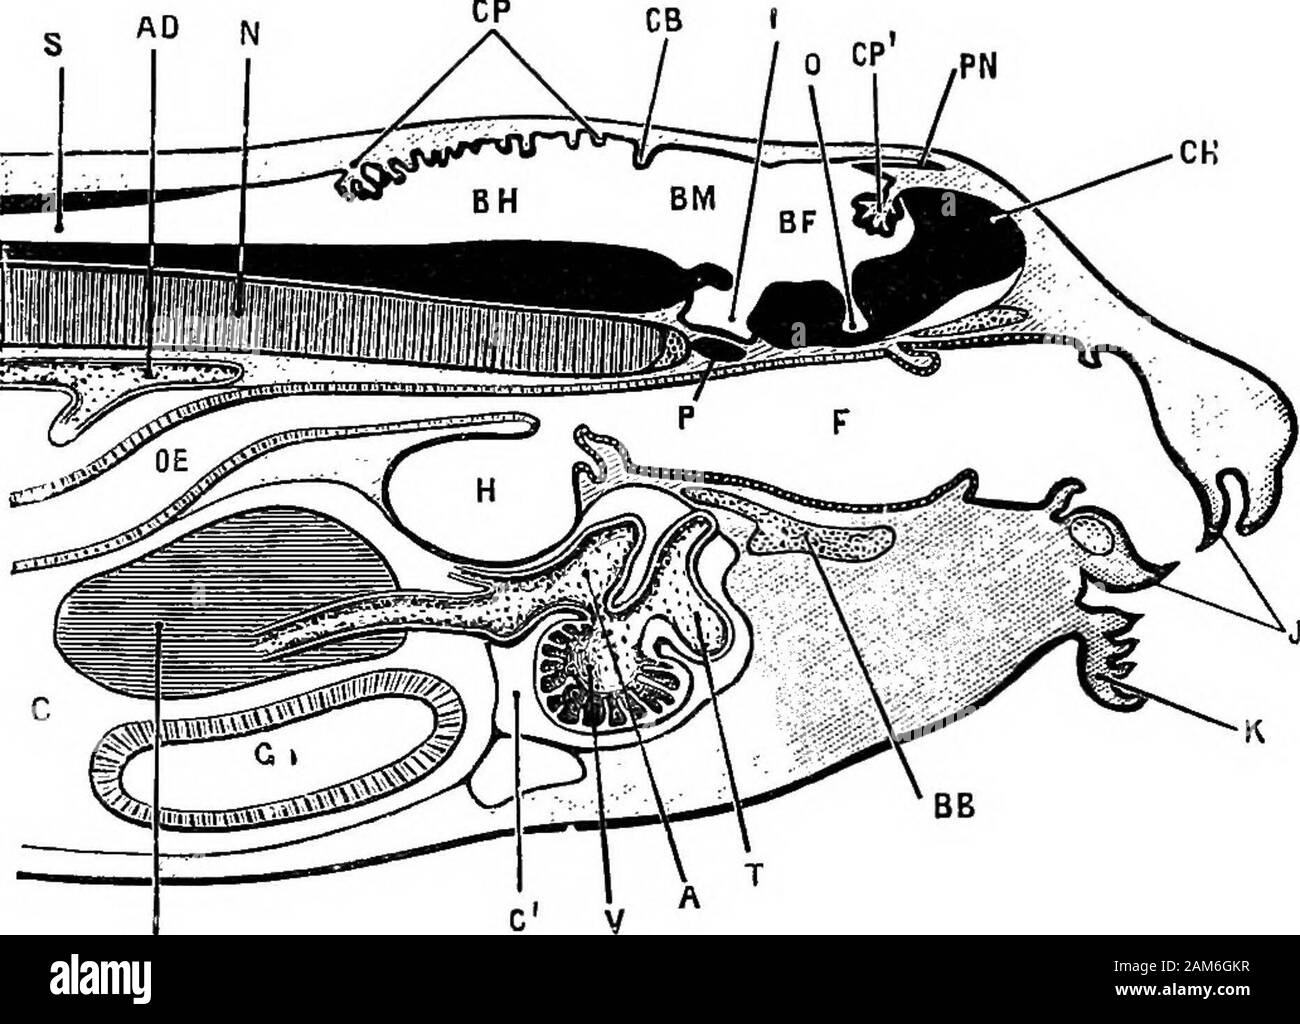 The frog: an introduction to anatomy, histology, and embryology . -brain;C, pericardial cavity; CV, vesicle of cerebral hemispheres ; I, infundi-bulum ; L, liver ; N, notochord ; o, depression of floor of fore-brainfrom which the optic vesicles arise; OE, oesophagus; P, pituitarybody; PN, pineal body; S, central canal of spinal cord : SO, stomo-dseum ; T, truncus arteriosus ; V, ventricle ; Y, yolk-cells. spinal cord. The lumen or cavity of the tube persists as the central canal of the spinal cord and the ventricles of the brain. The Brain. At the time of its first appearance the brain is bent Stock Photo